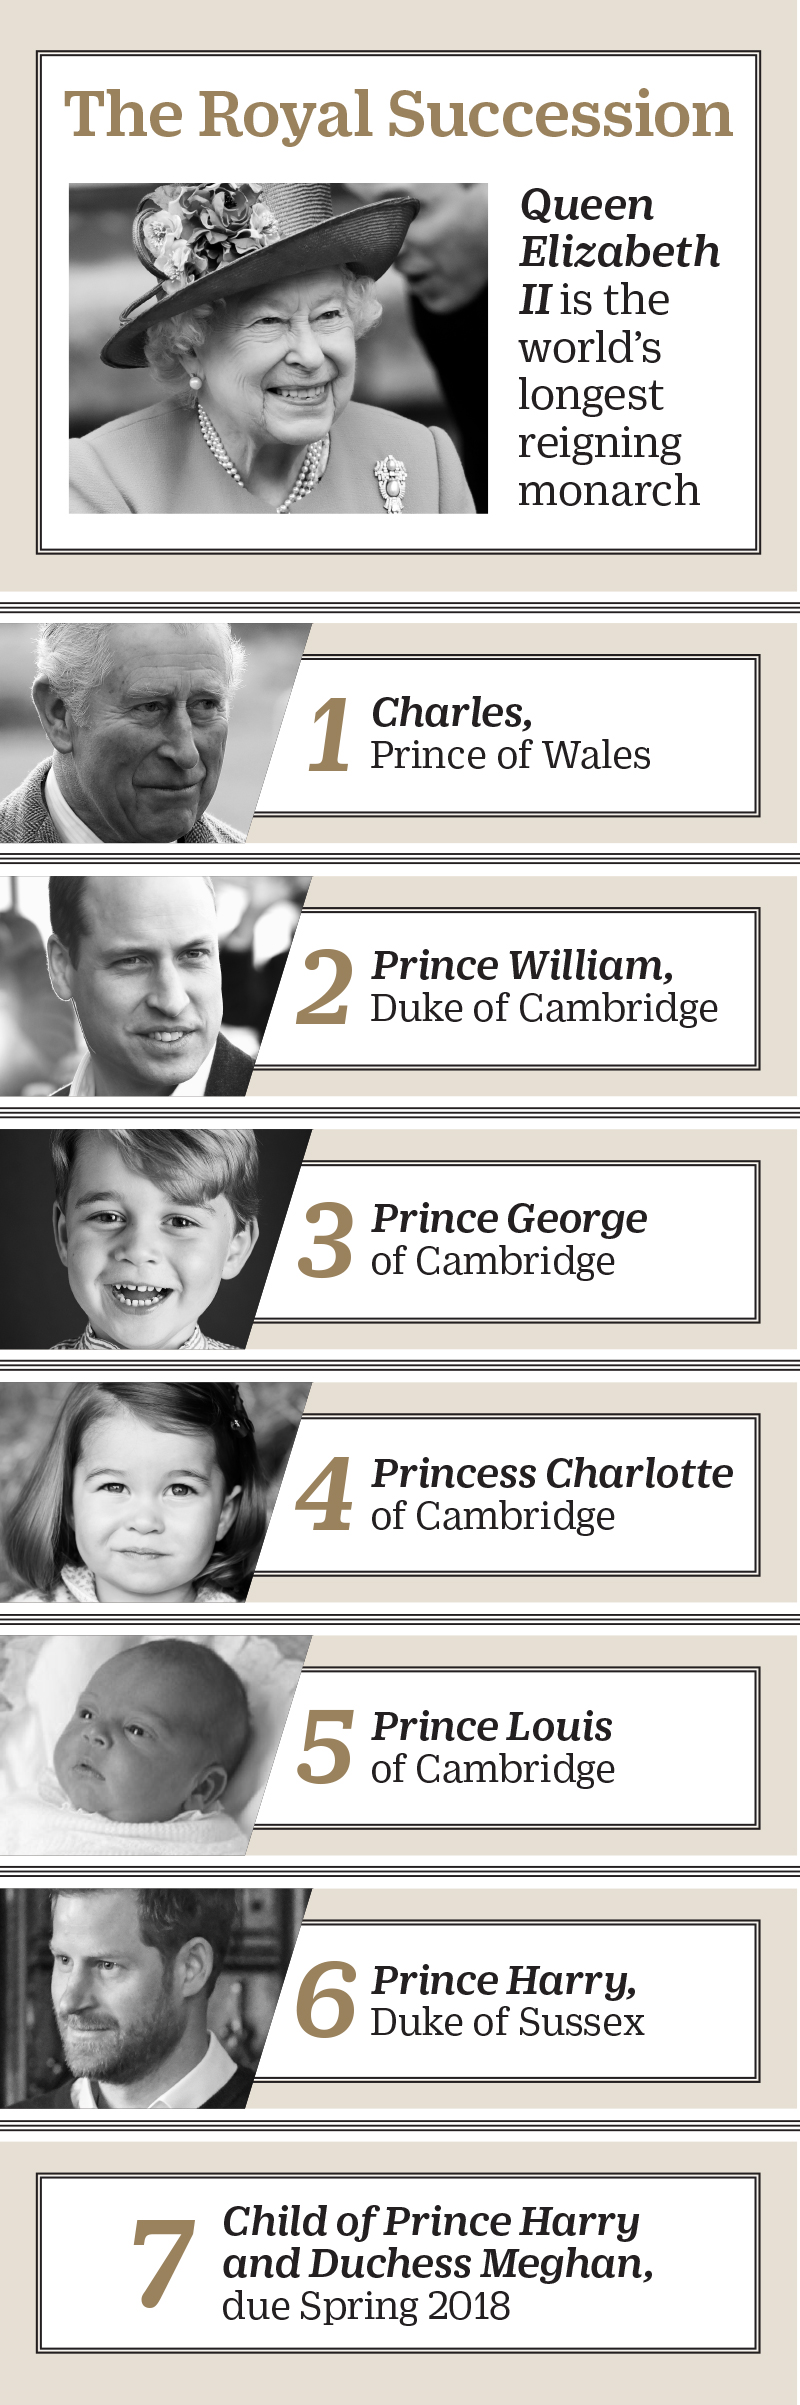 Royal family succession